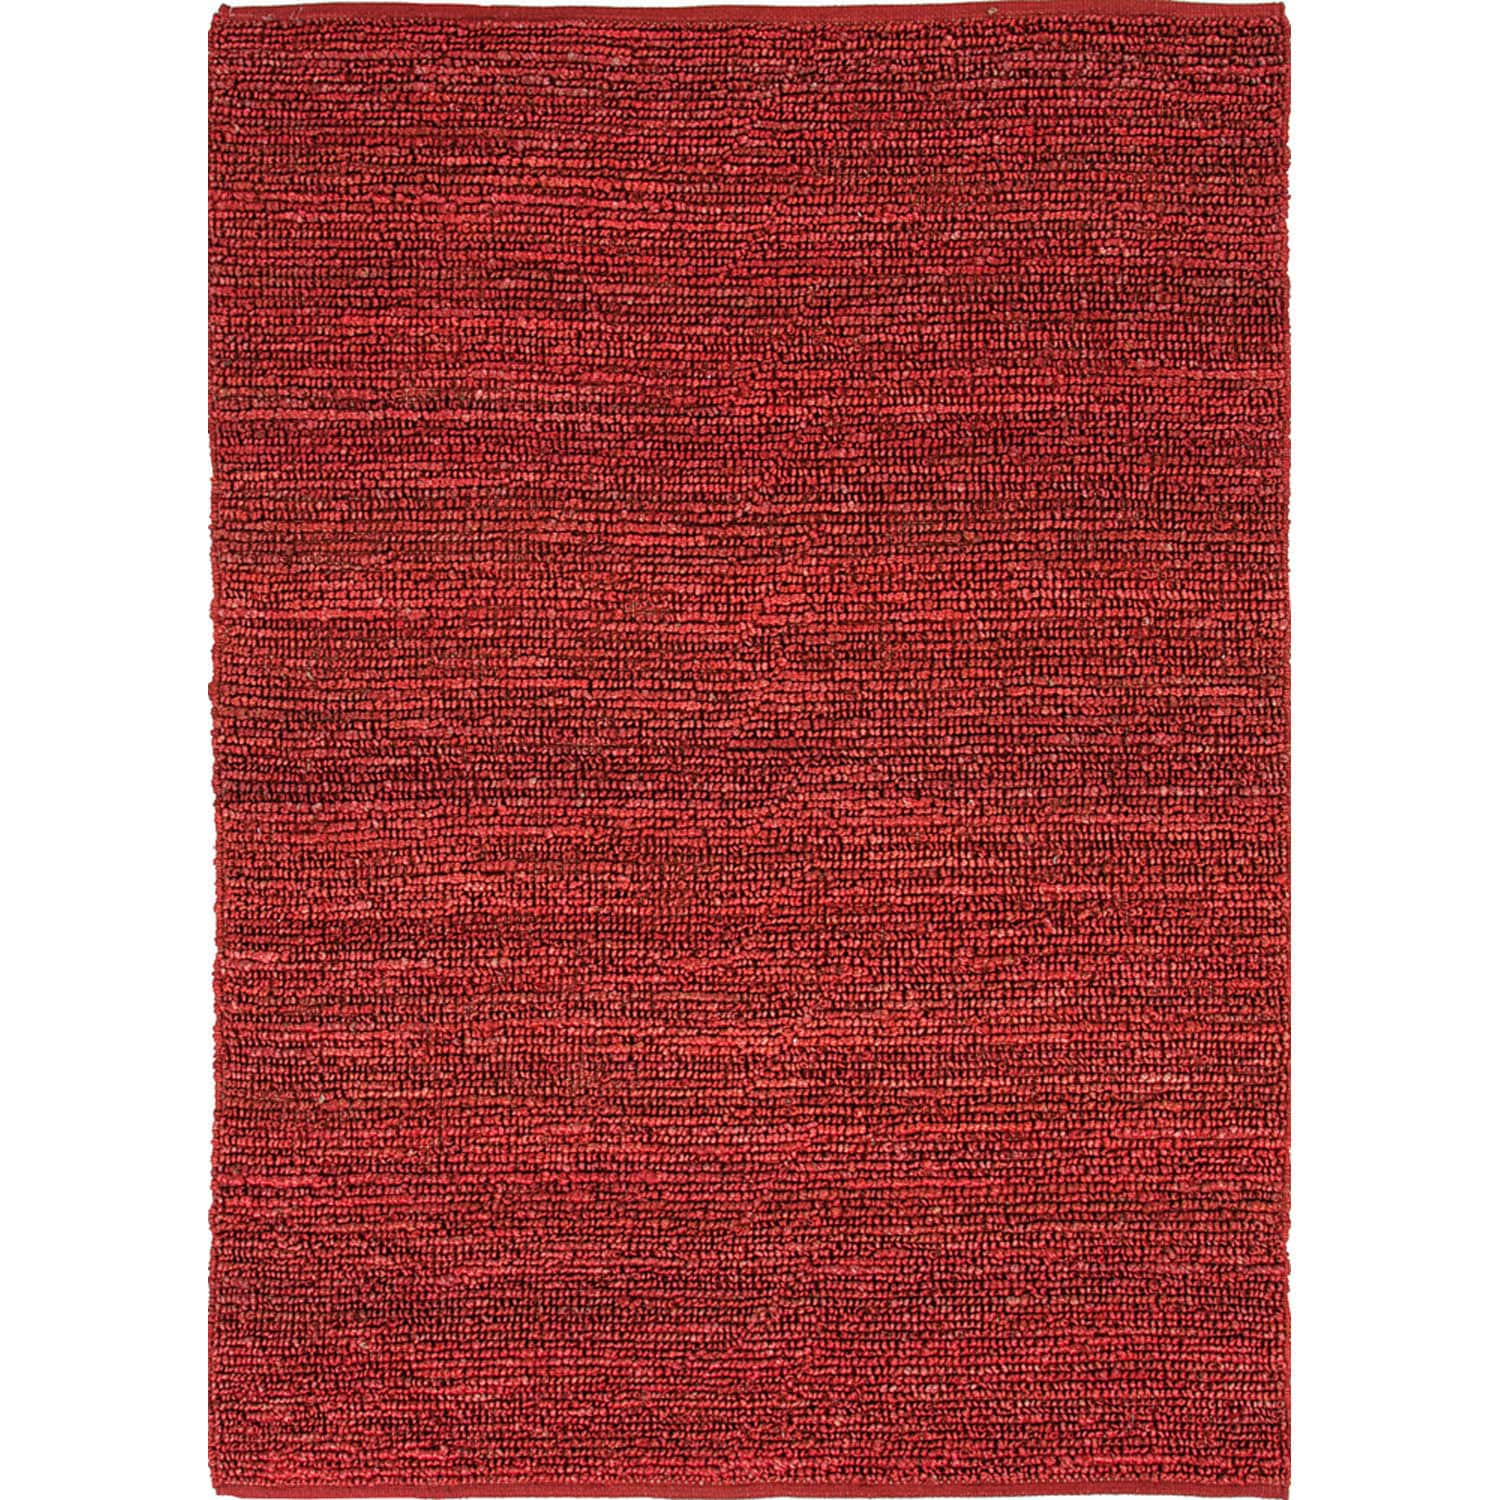 Hand woven Naturals Solid Pattern Red/ Orange Rug (2 X 3)